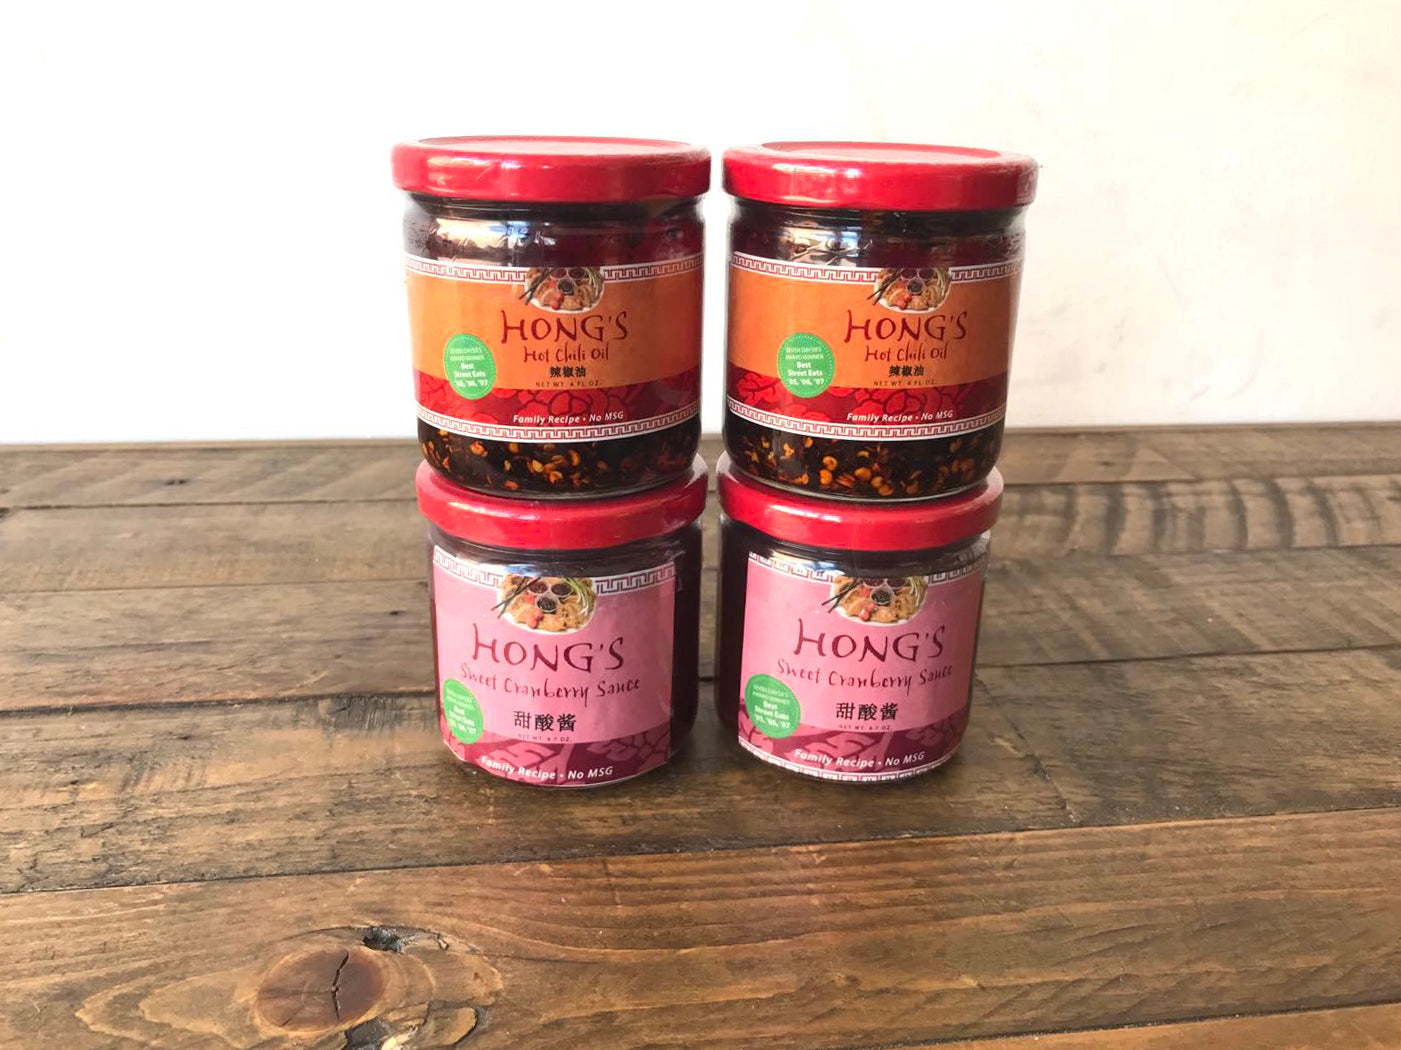 Hot Chili Oil + Sweet Cranberry sauce (2 jars of each)